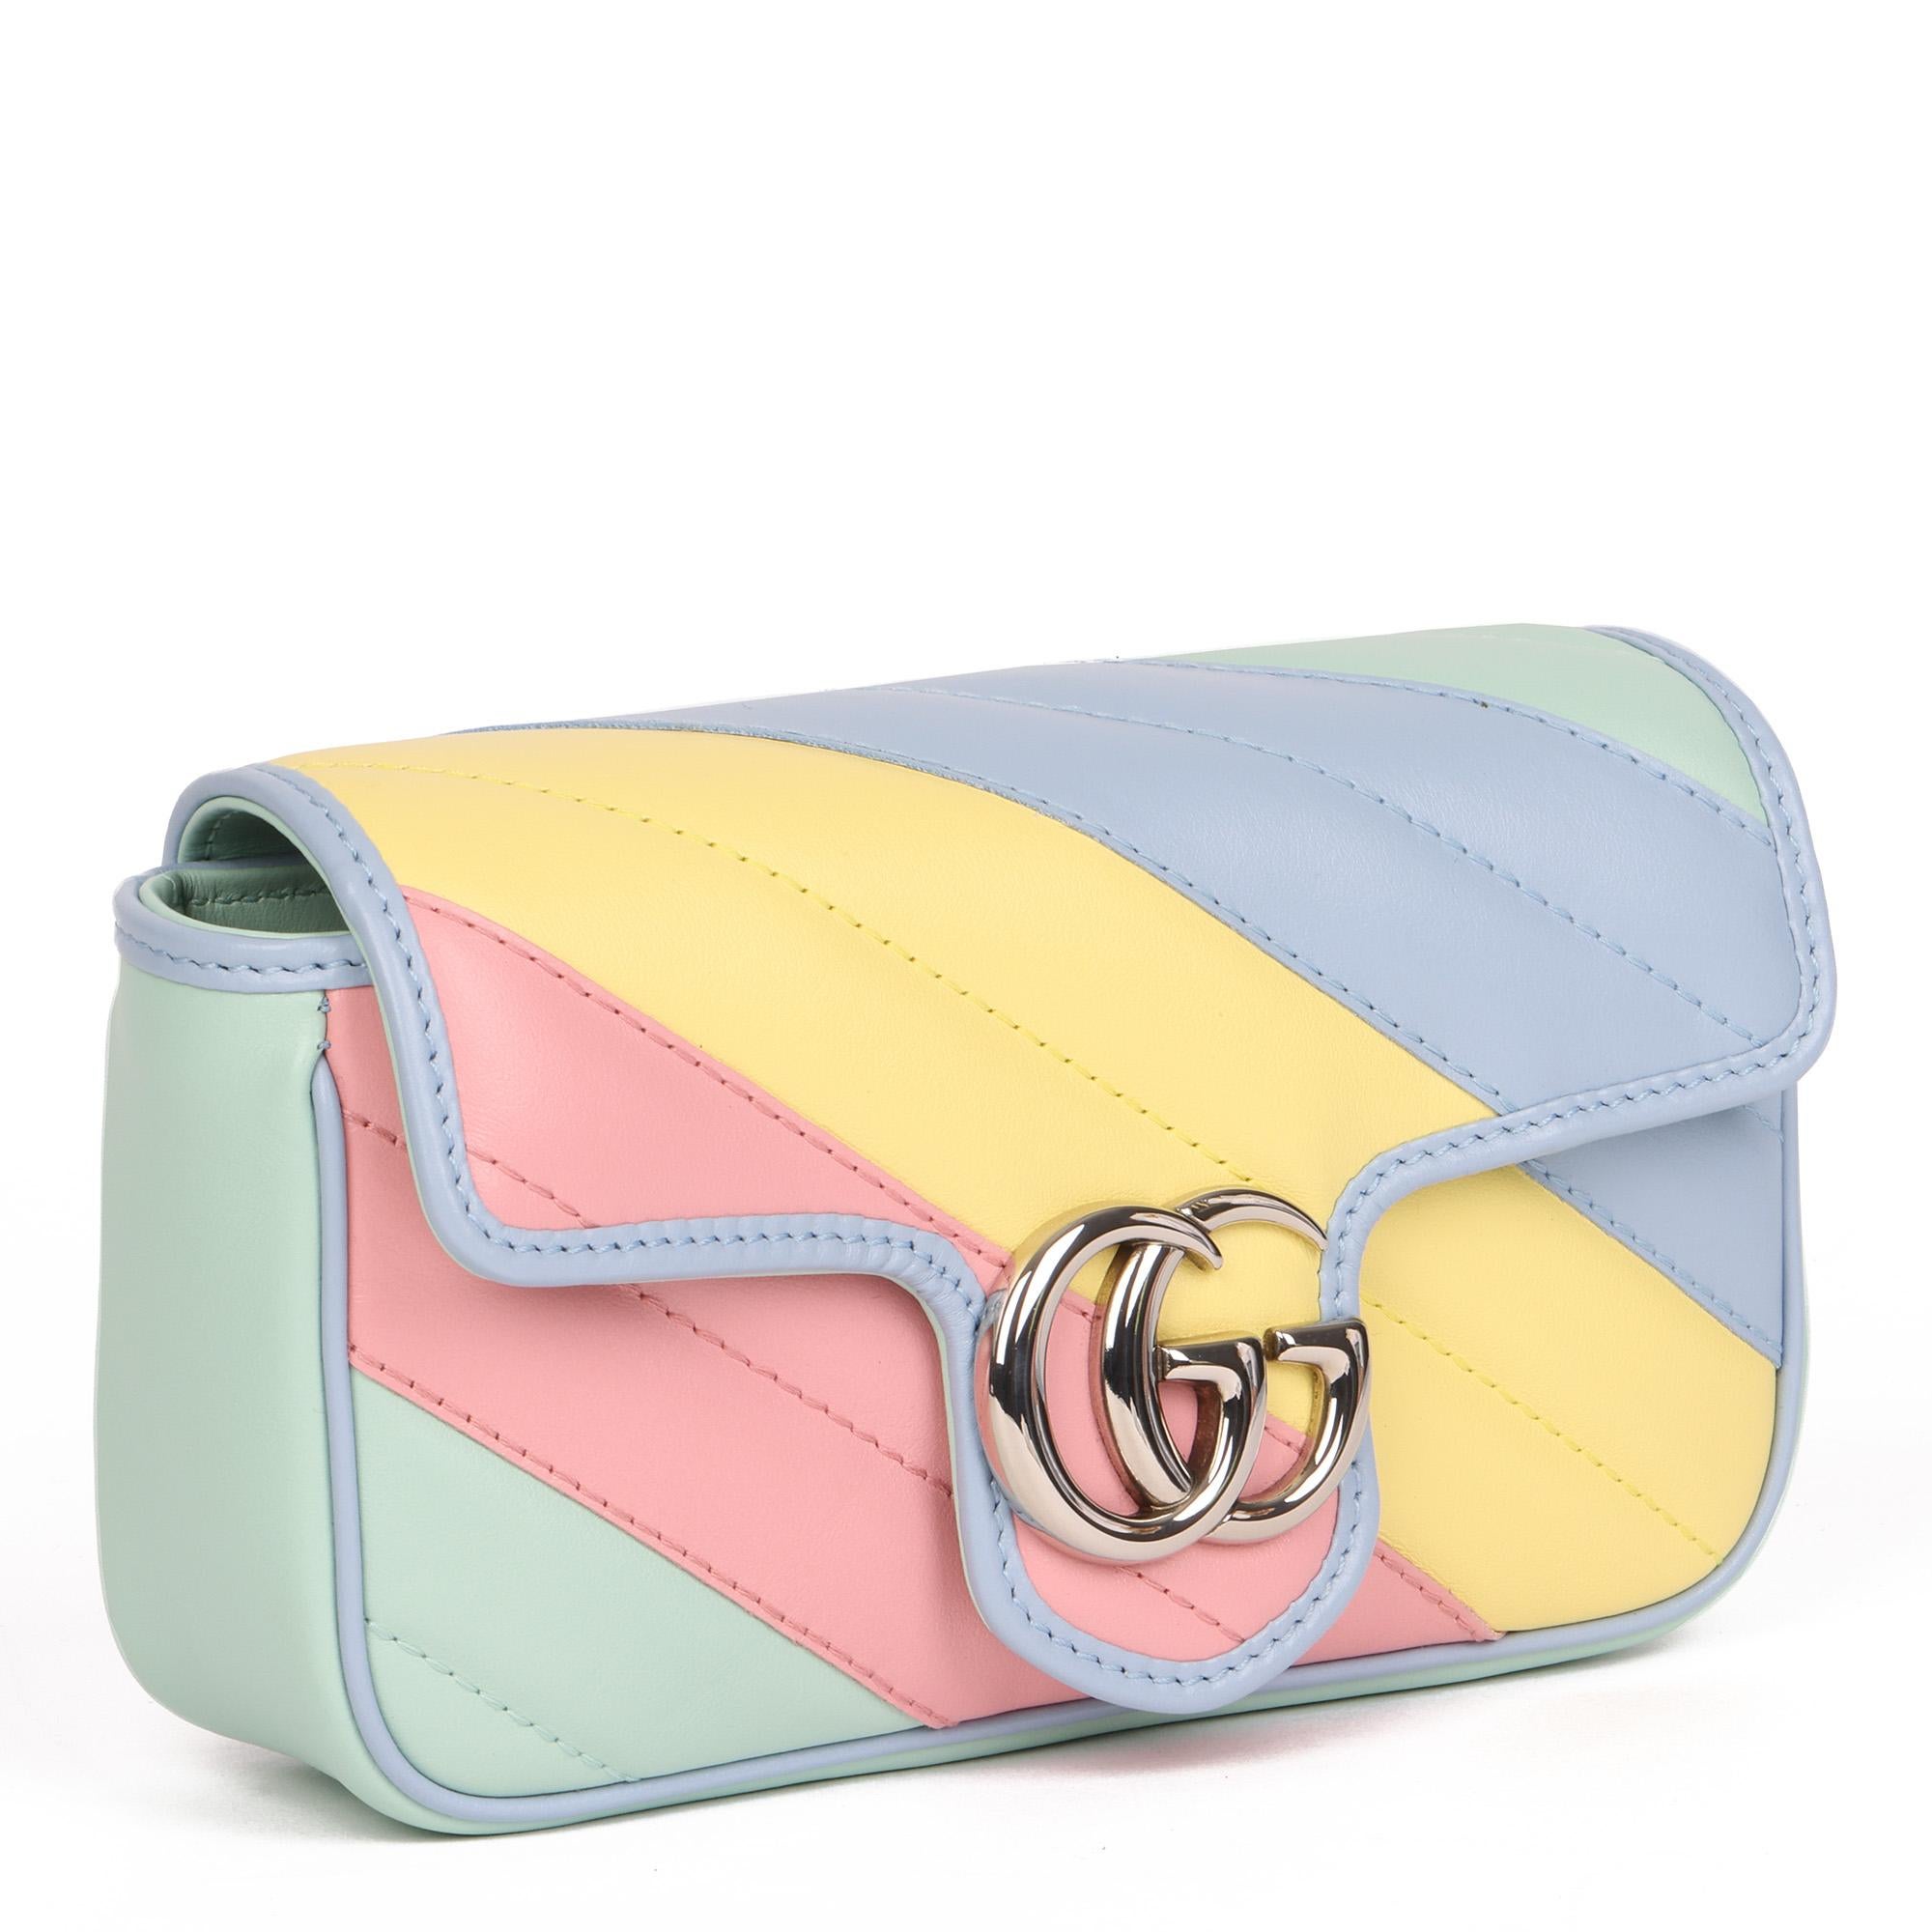 GUCCI
Green, Yellow, Pink & Blue Quilted Calfskin Leather Multicolour Mini Marmont

Xupes Reference: HB4042
Serial Number: 476433 0416
Age (Circa): 2010
Accompanied By: Gucci Dust Bag, Box, Care Booklet
Authenticity Details: Date Stamp (Made in